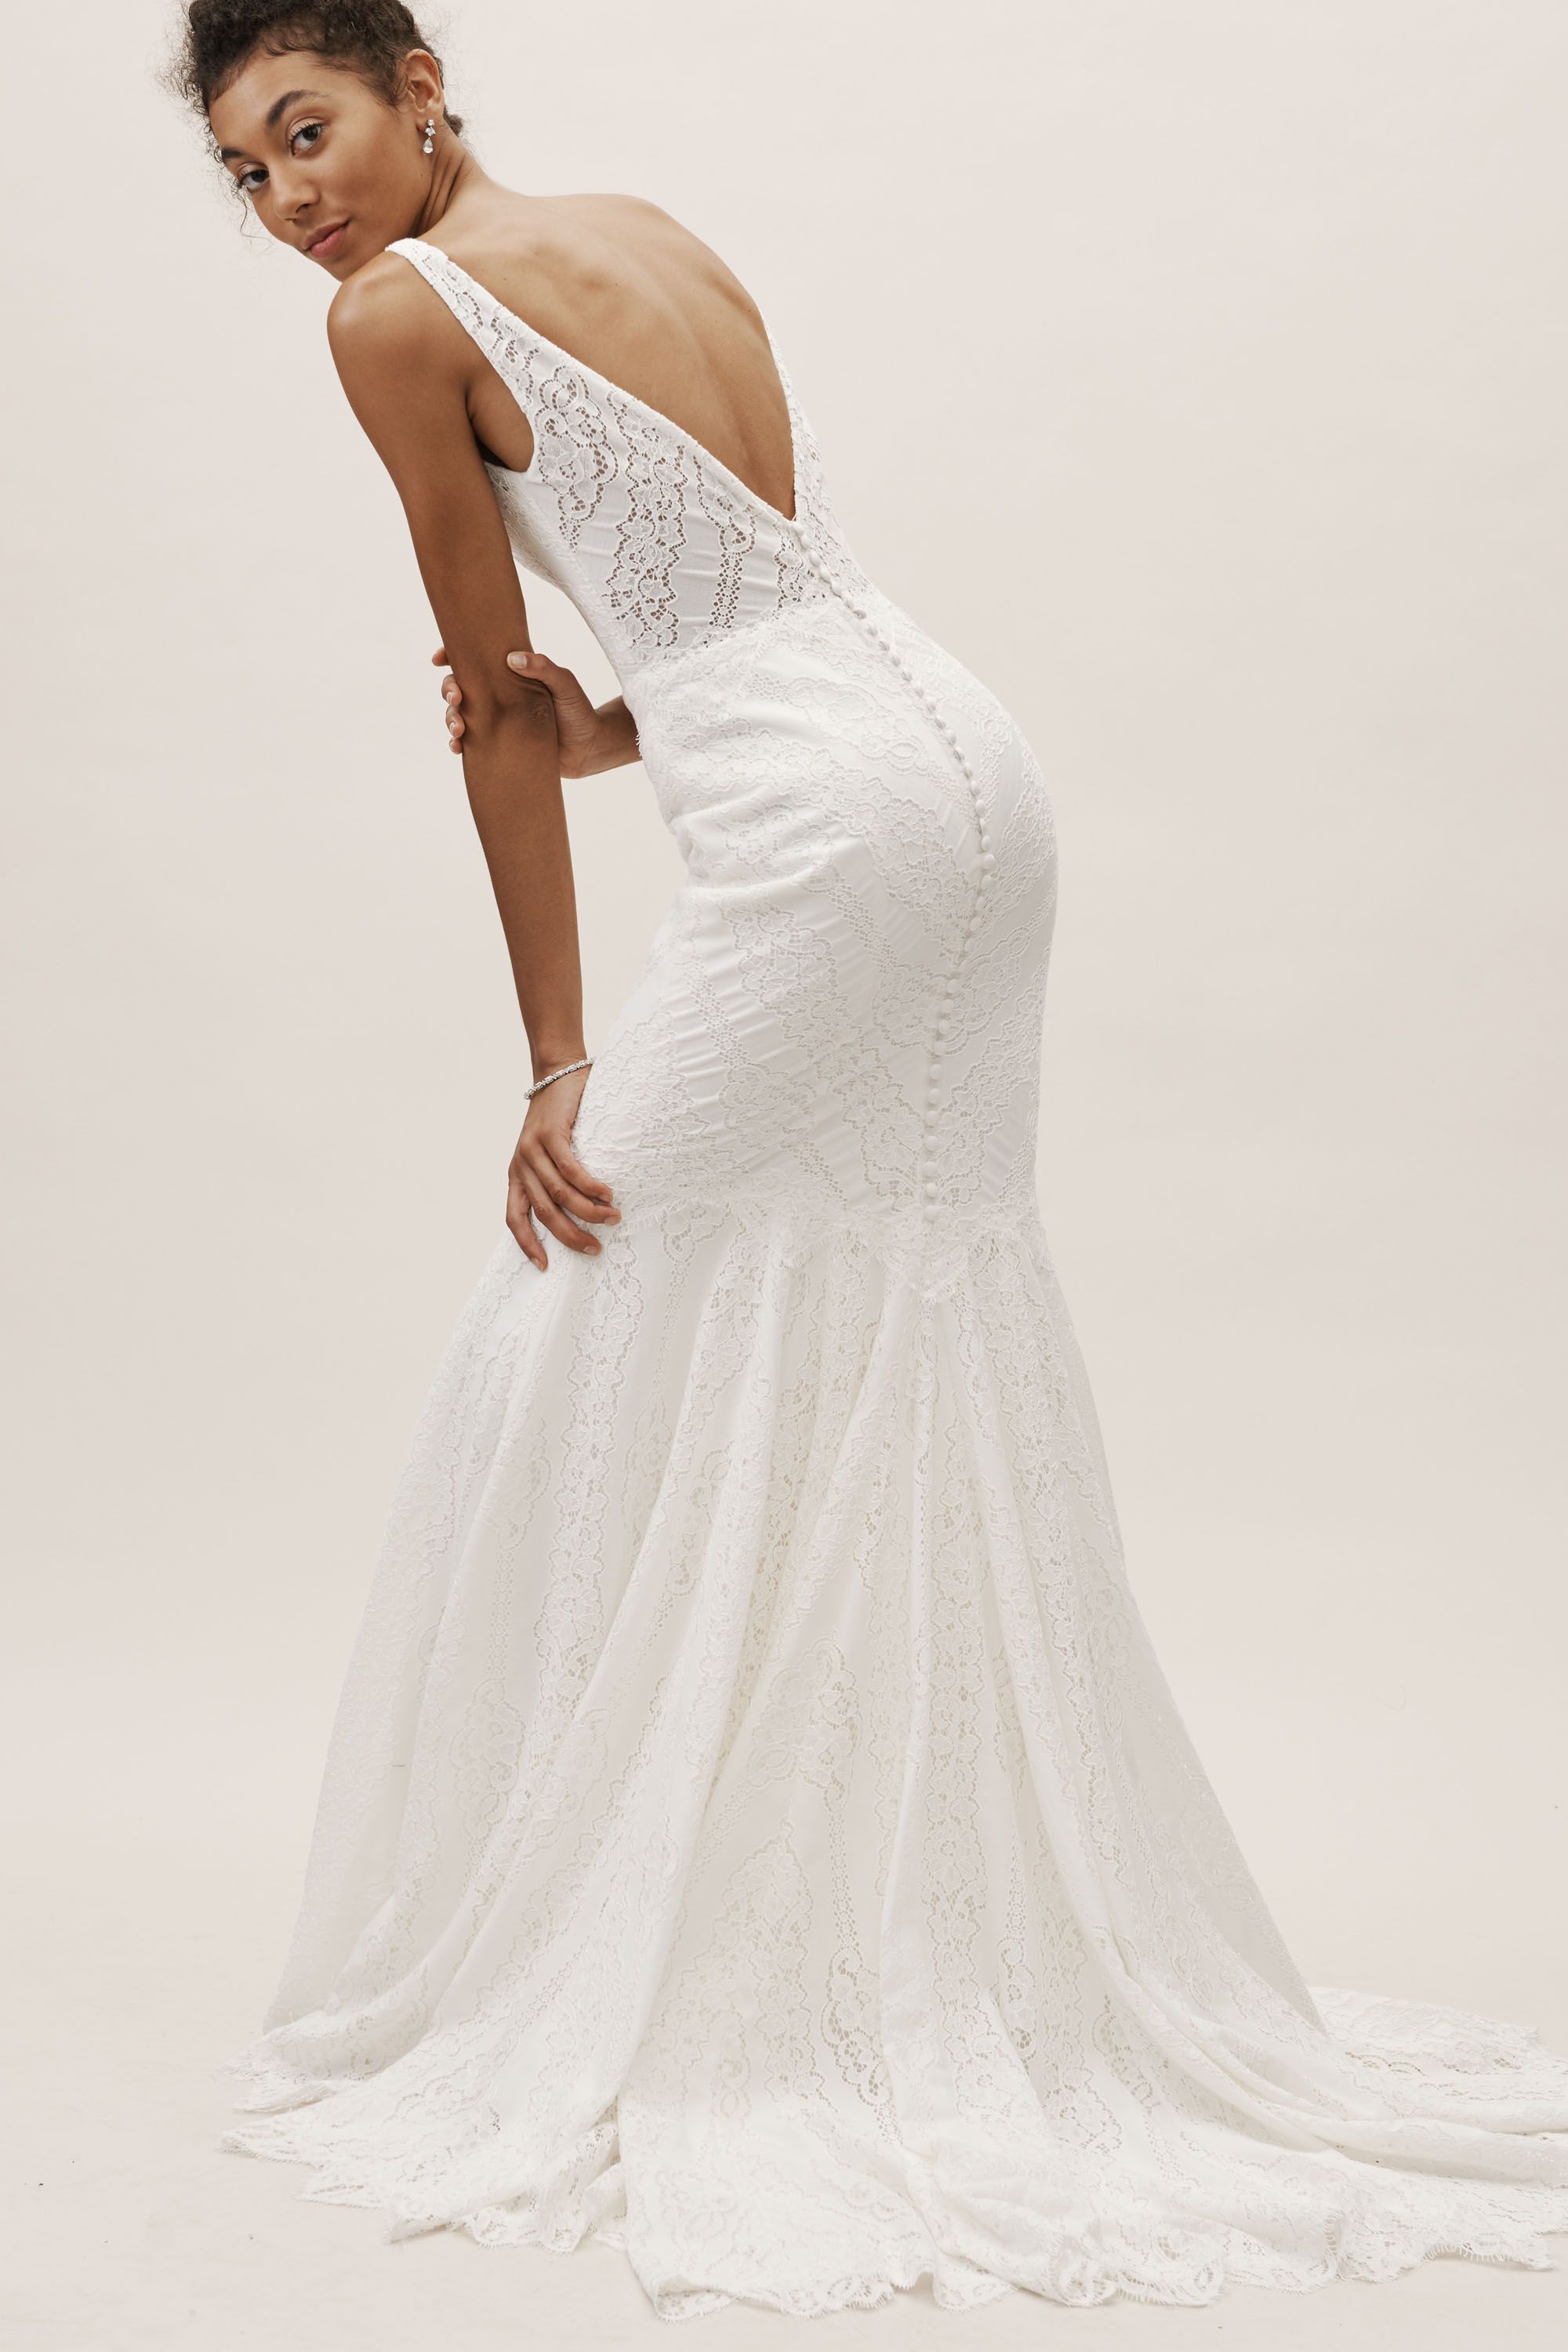 Lace Be A Lady Gown - BHLDN